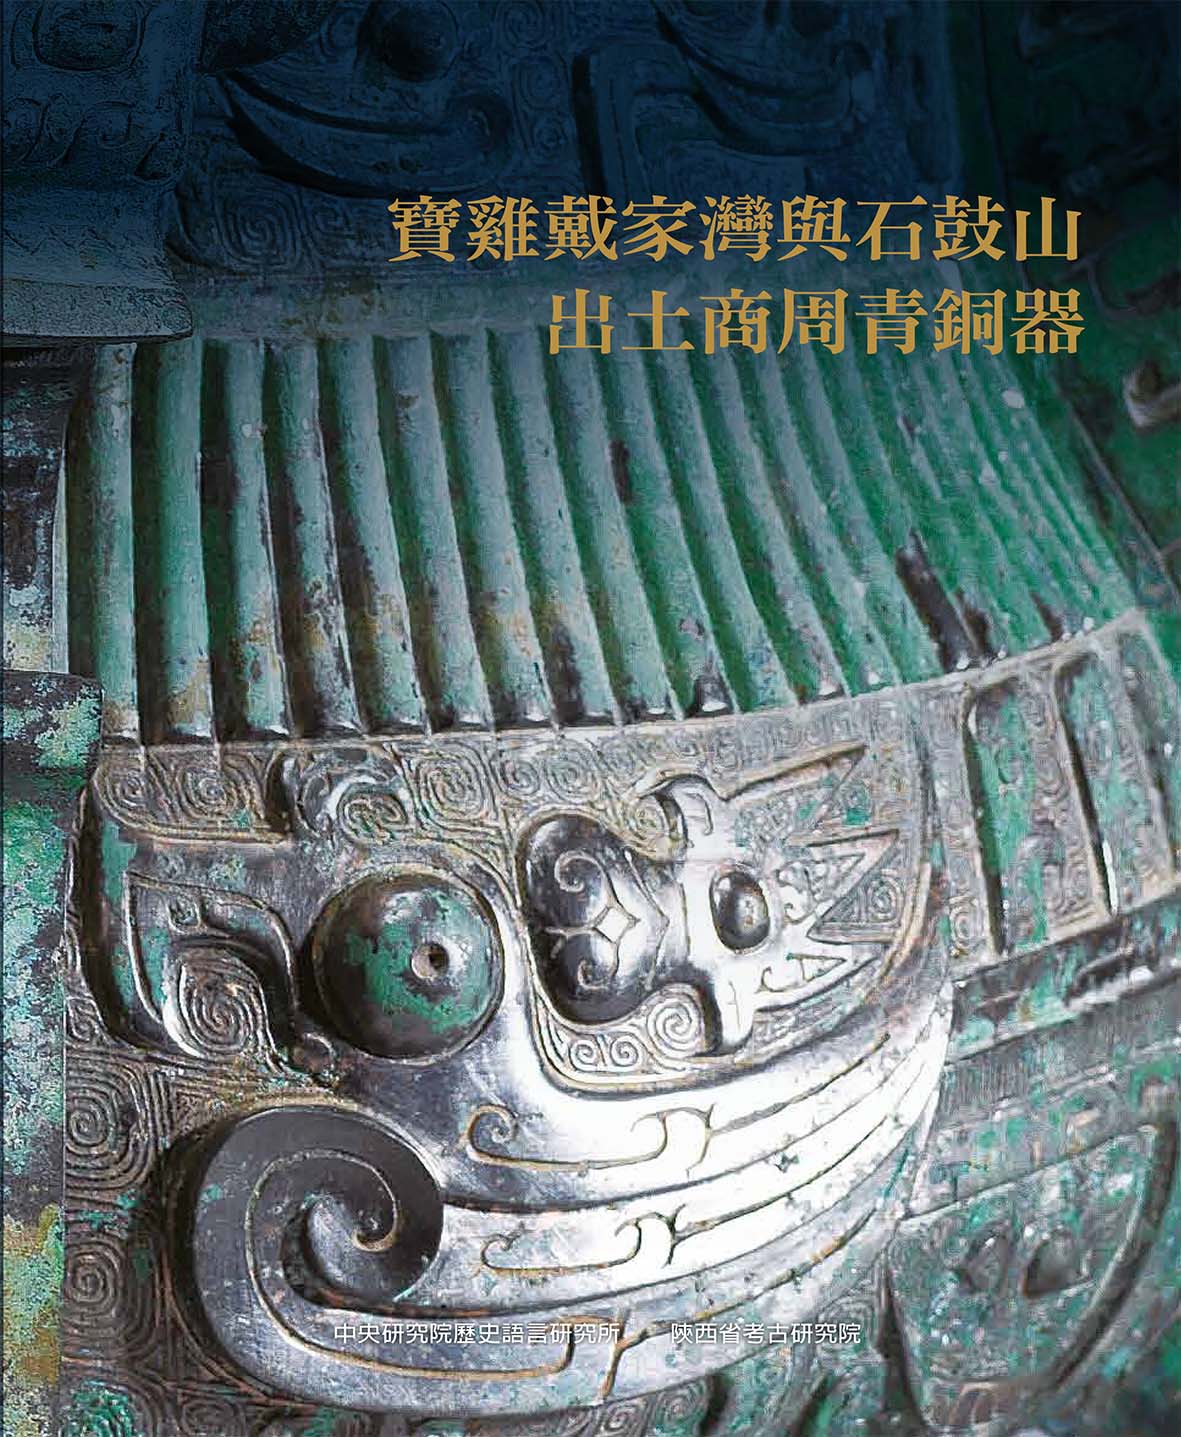 Unearthed Bronze Ware from Shang and Zhou Dynasties at Daijiawan and Shigushan Relic Sites in Baoji, Shannxi Province